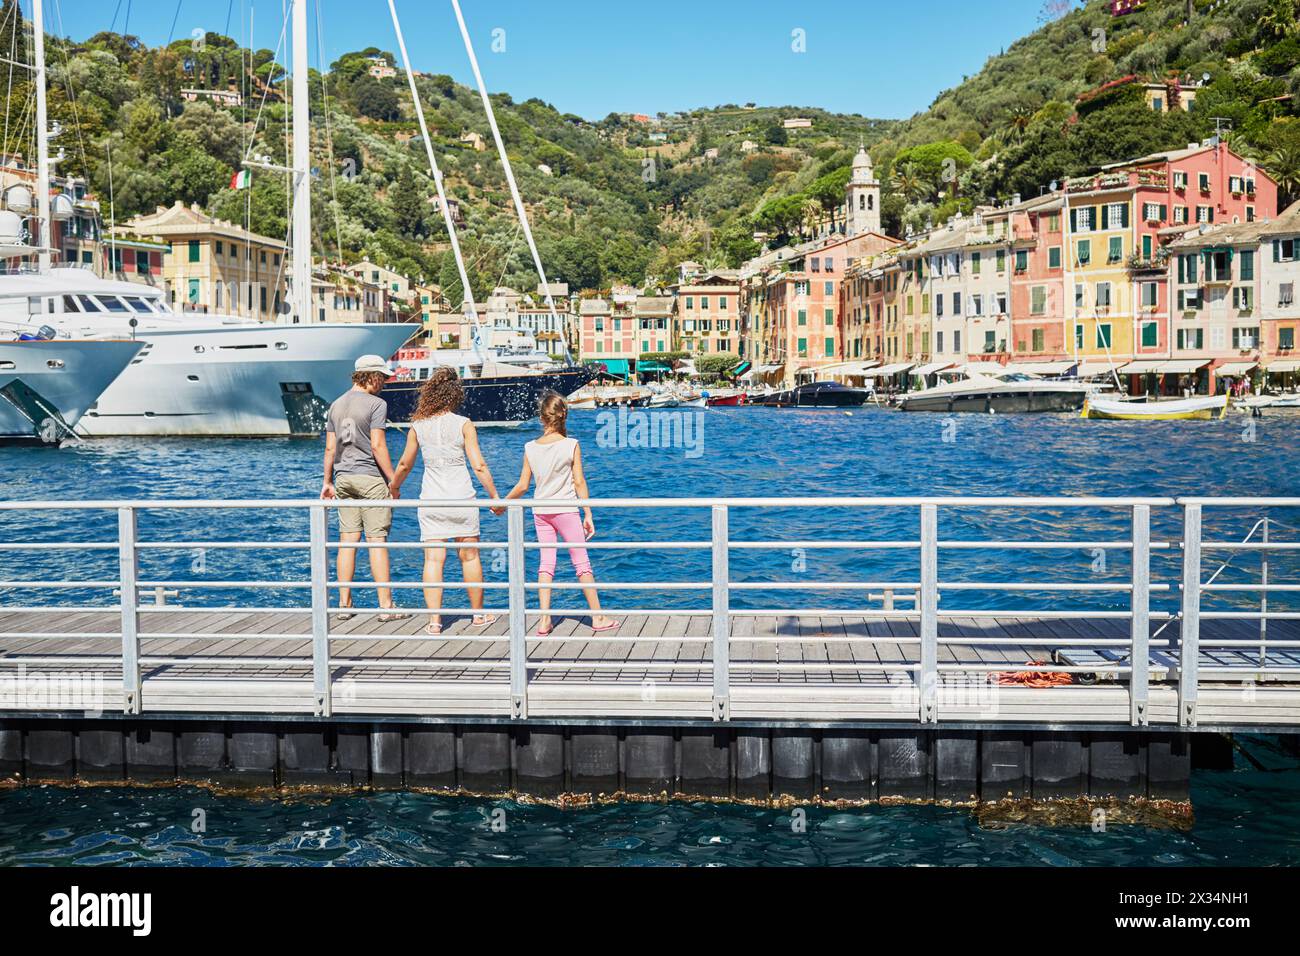 Woman and two children stand holding hands and looking at boats in sea bay with colorful buildings on the shore. Stock Photo